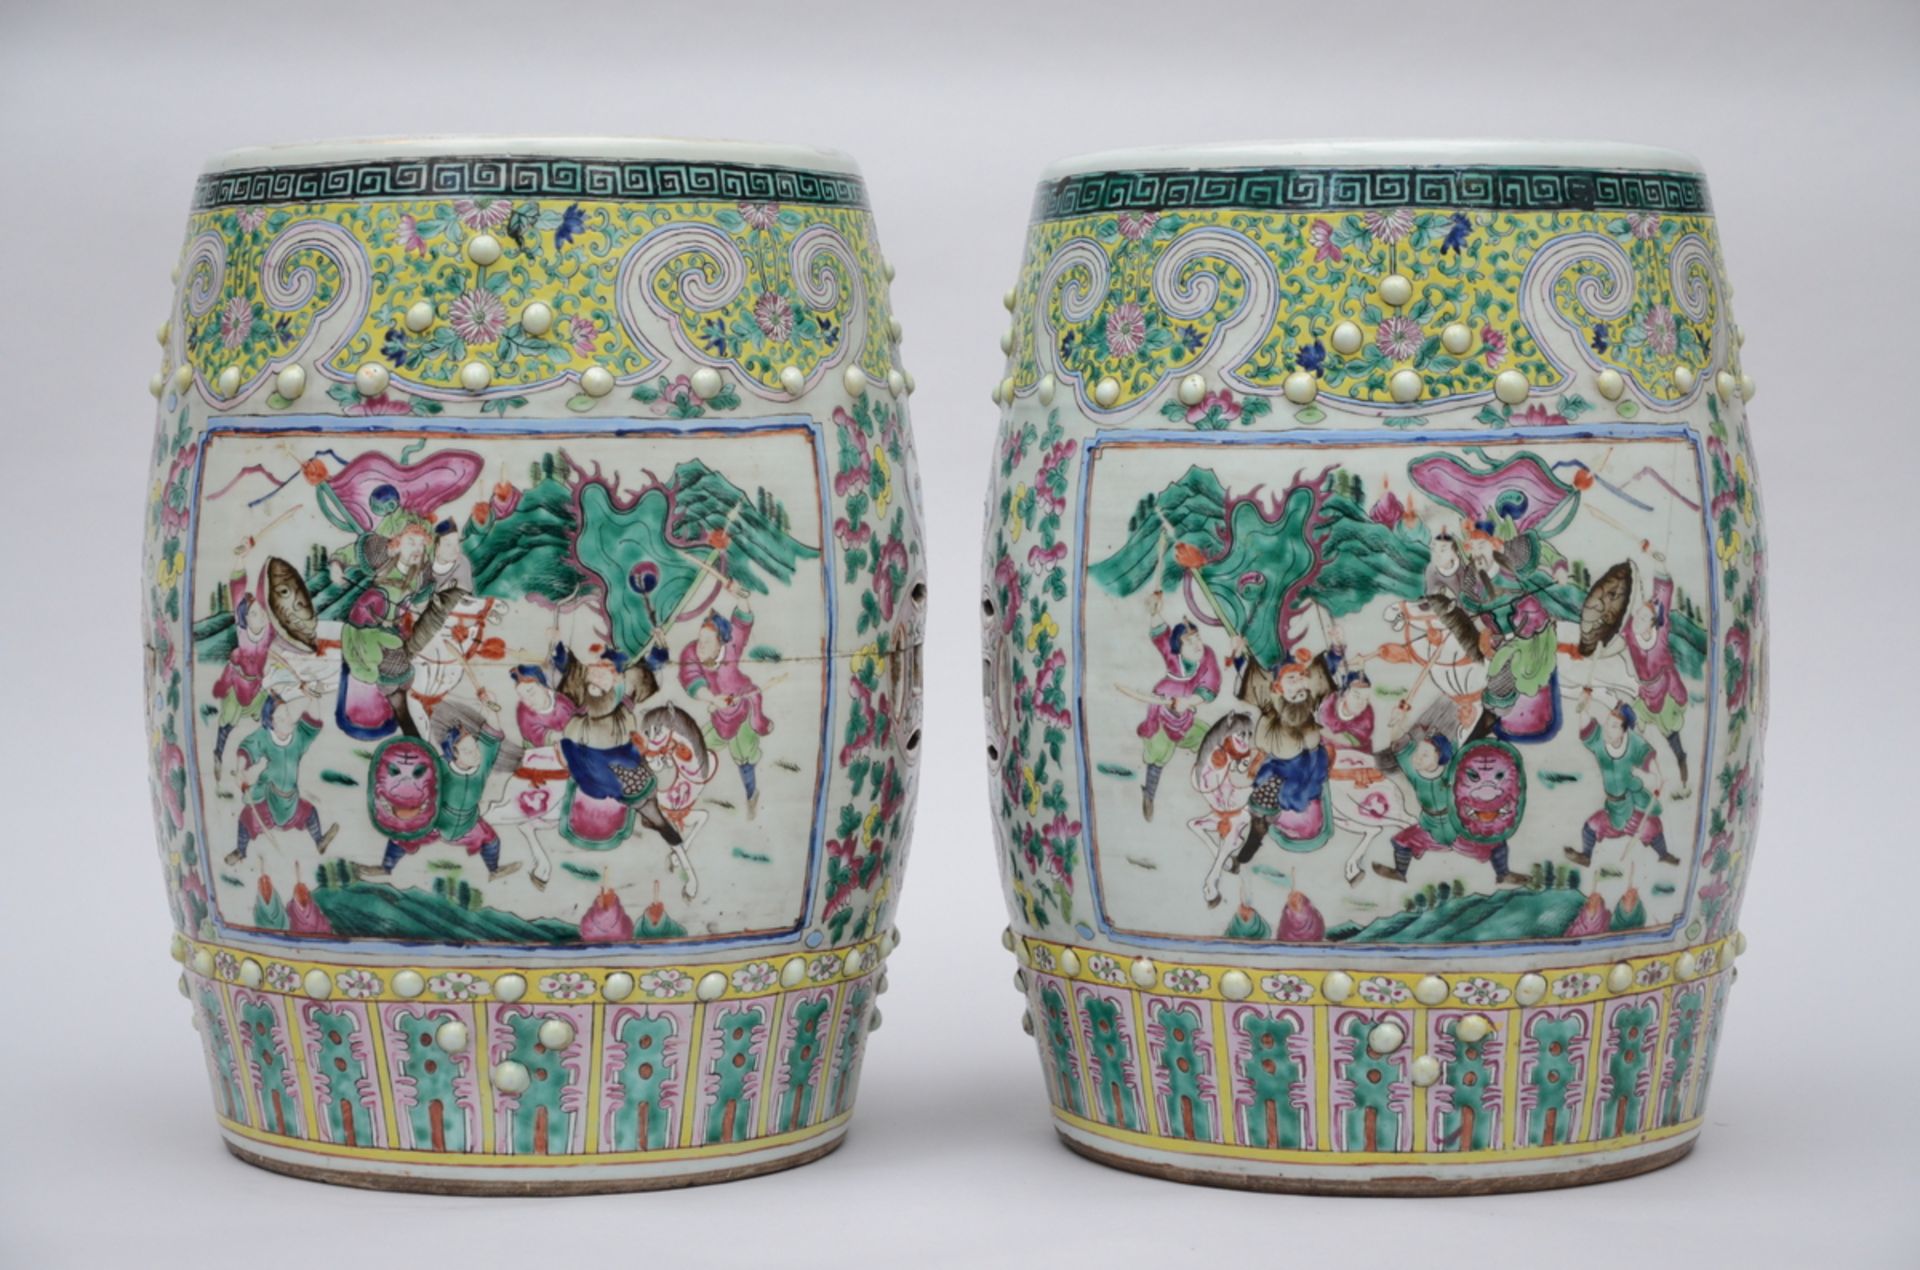 A pair of stools in Chinese famille rose porcelain 'warriors', 19th century (48x32 cm) (*)